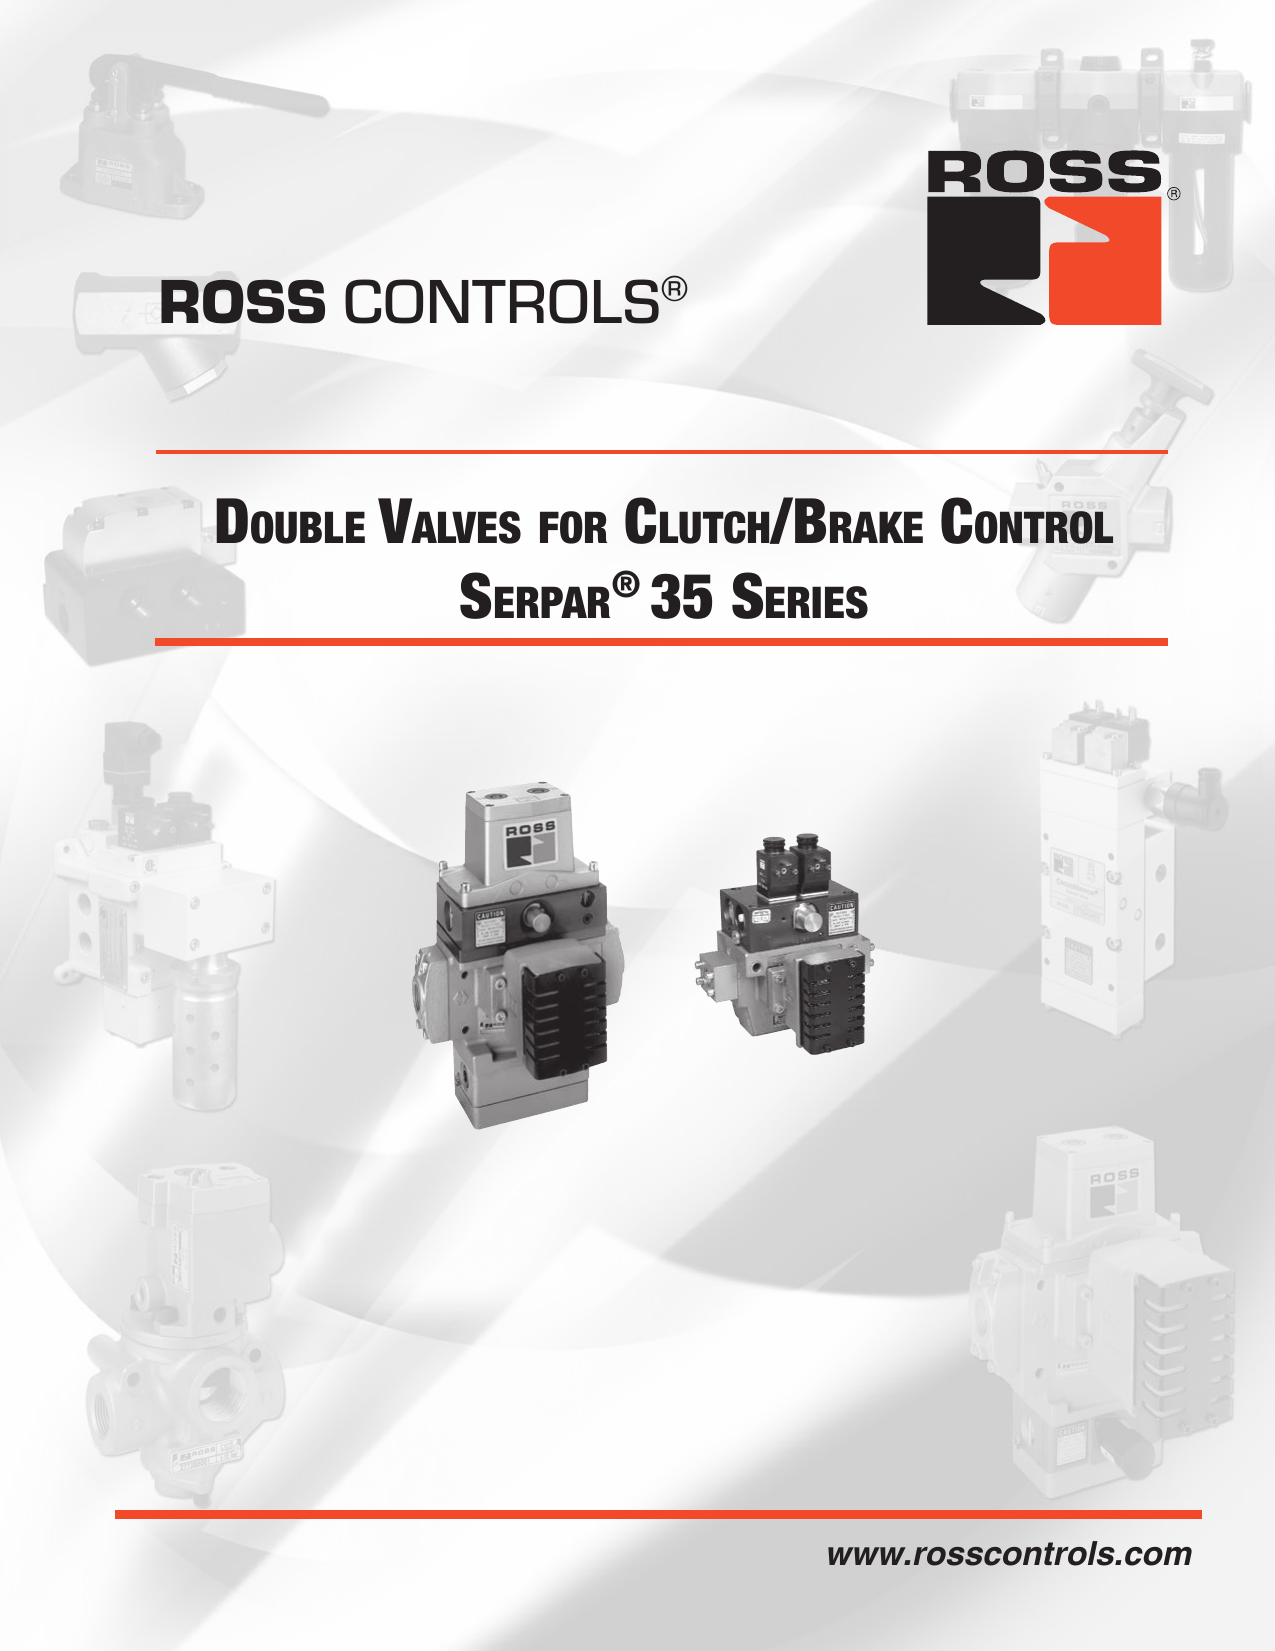 Remote Reset Dynamic Monitoring Dynamic Memory Ports 3/4 NPT 110 VAC Ports 3/4 NPT 110 VAC Left Inlet Ross Controls 3573D5216Z 35/SERPAR Series Solenoid Controlled Valve L-G Monitor Type 